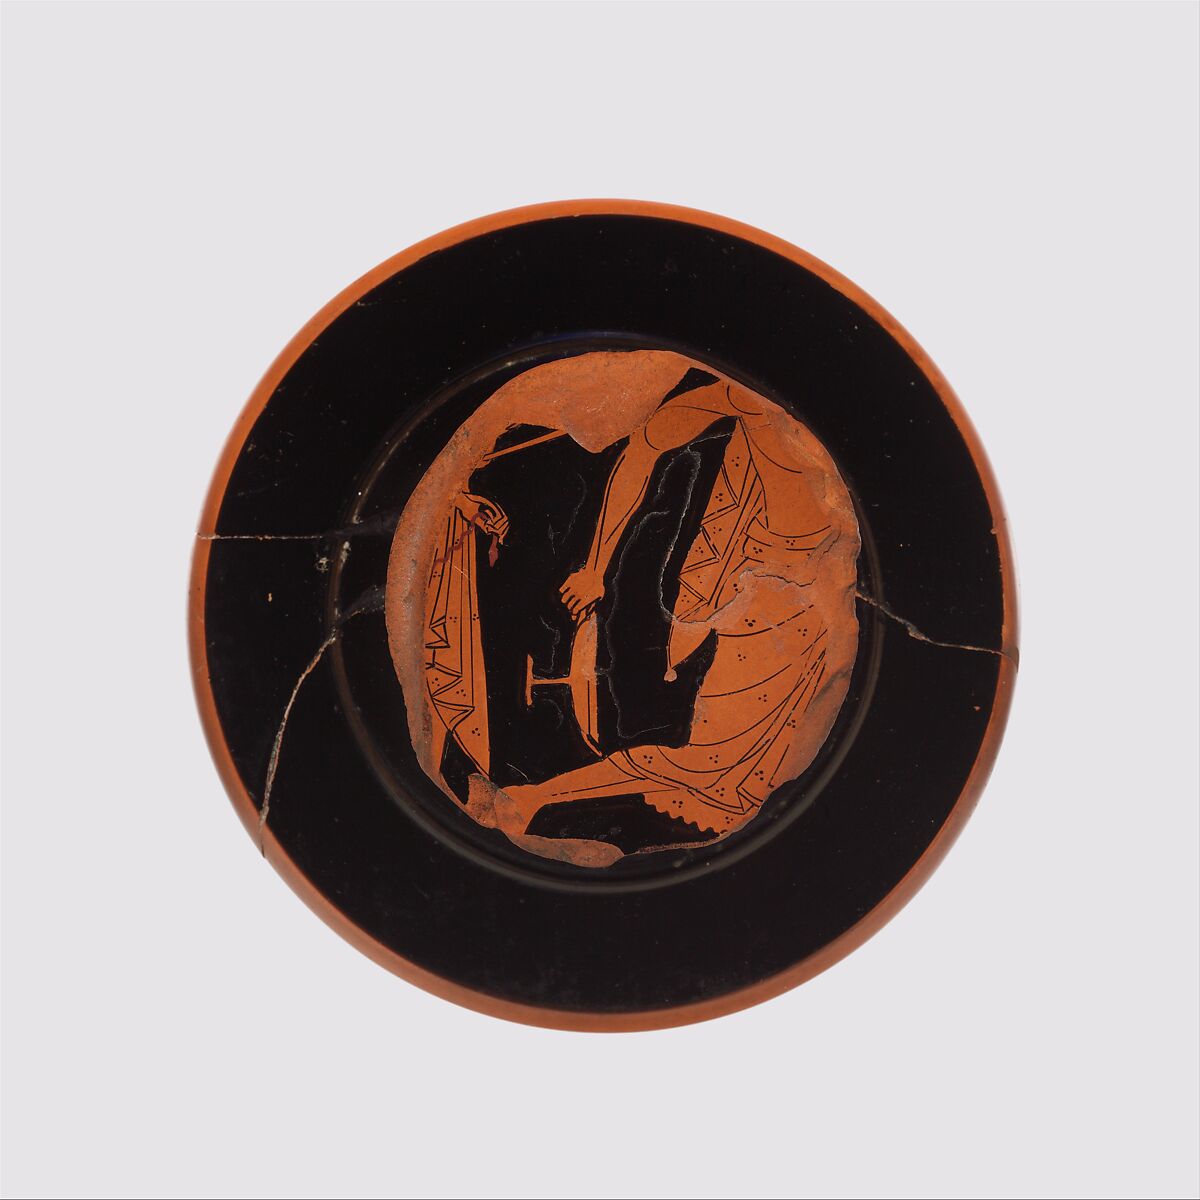 Fragments of a terracotta kylix (drinking cup), Attributed to Euphronios, Terracotta, Greek, Attic 